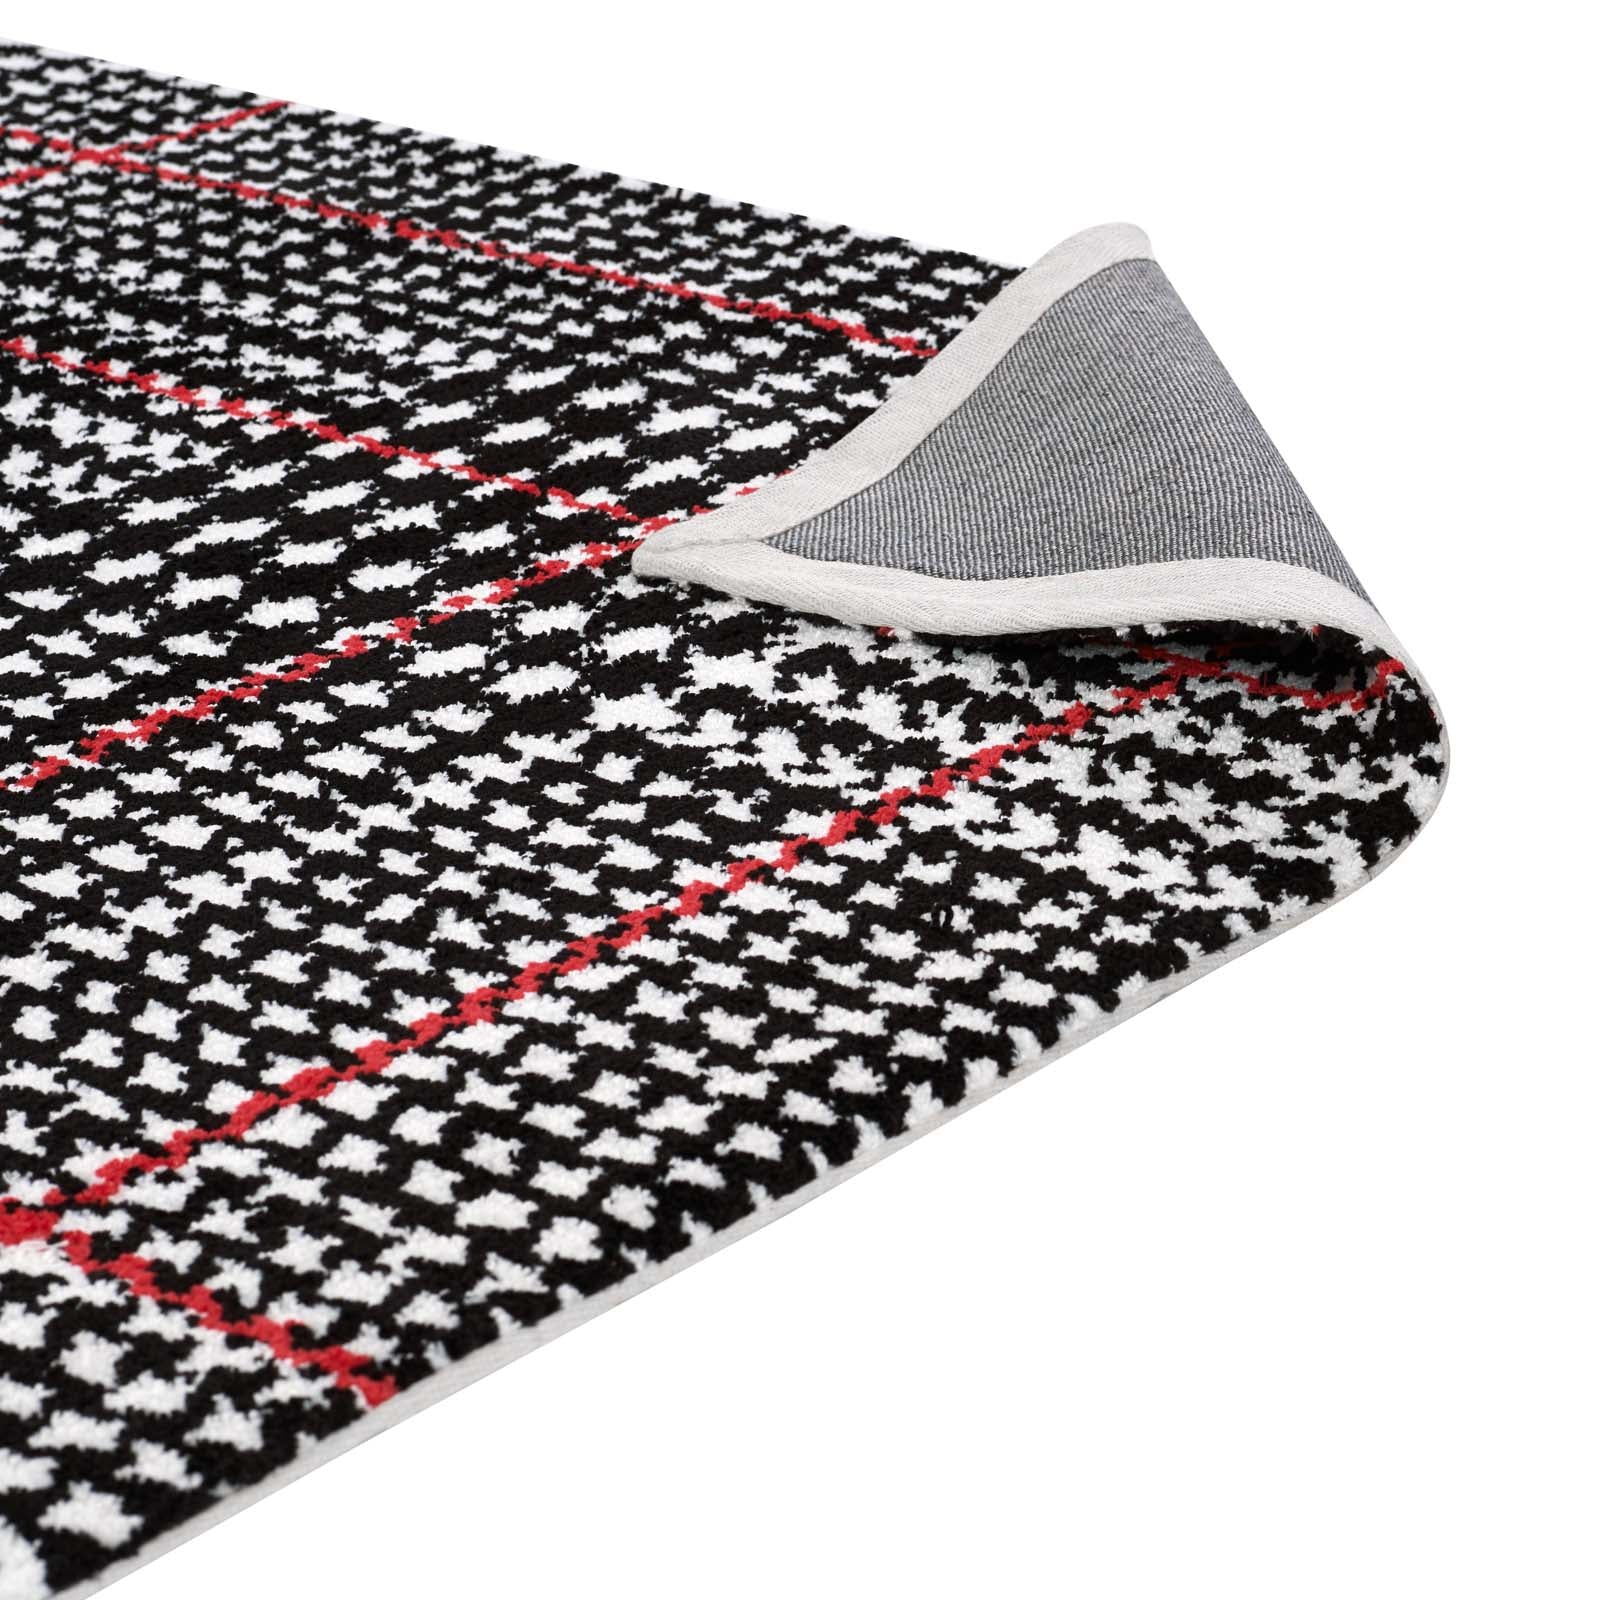 Modway Indoor Rugs - Kaja Abstract Plaid 5x8 Area Rug Ivory, Black & Red